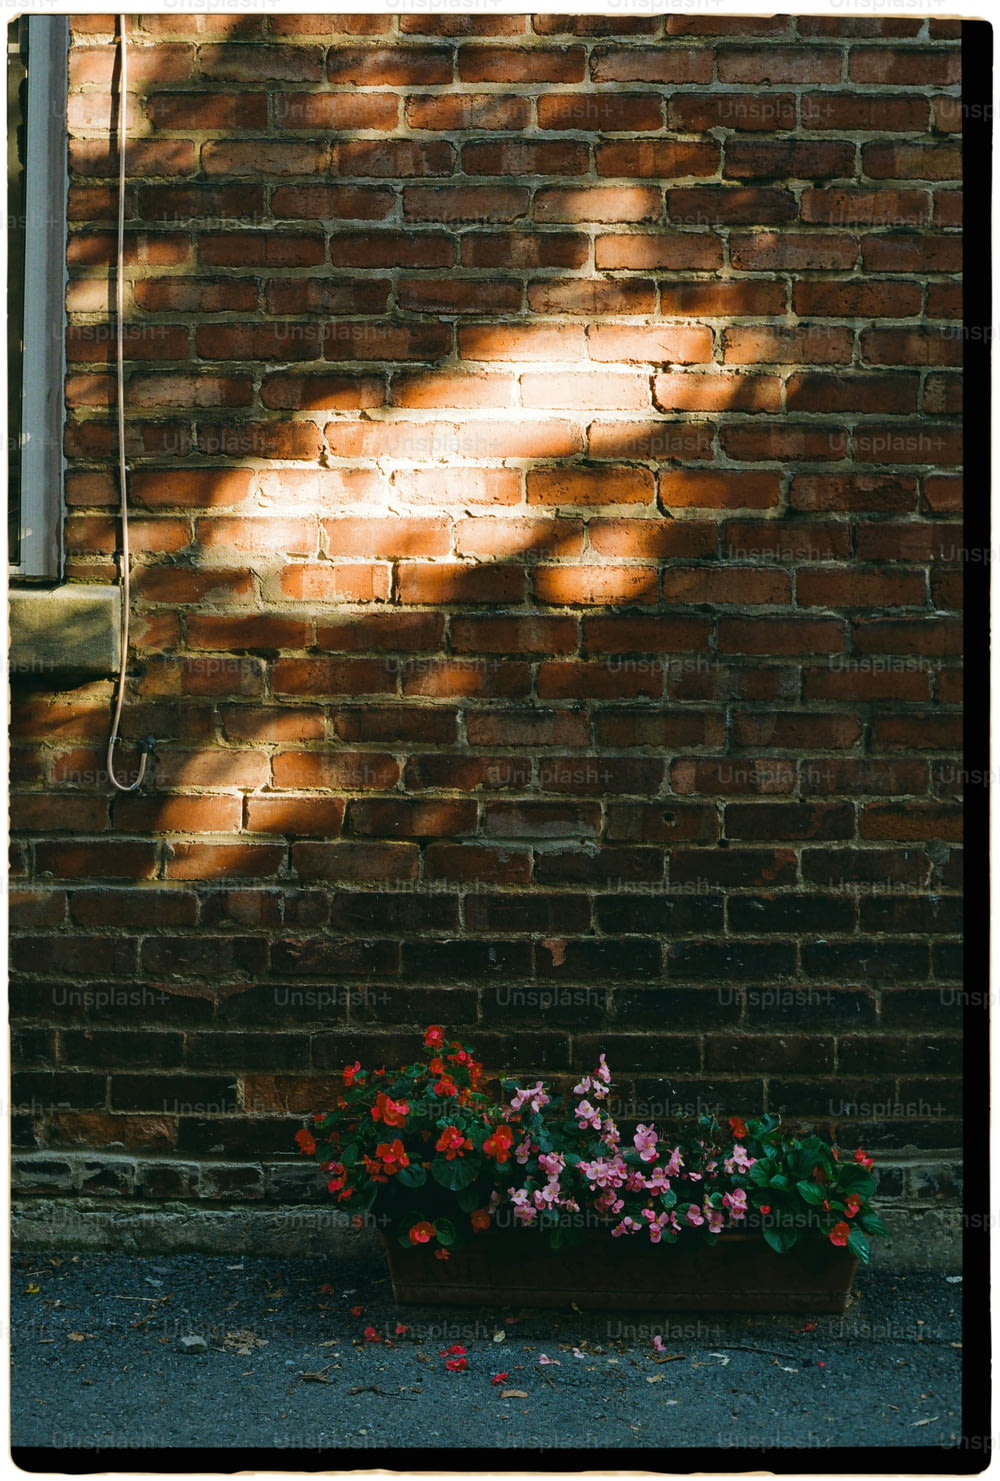 a brick wall with a planter filled with flowers